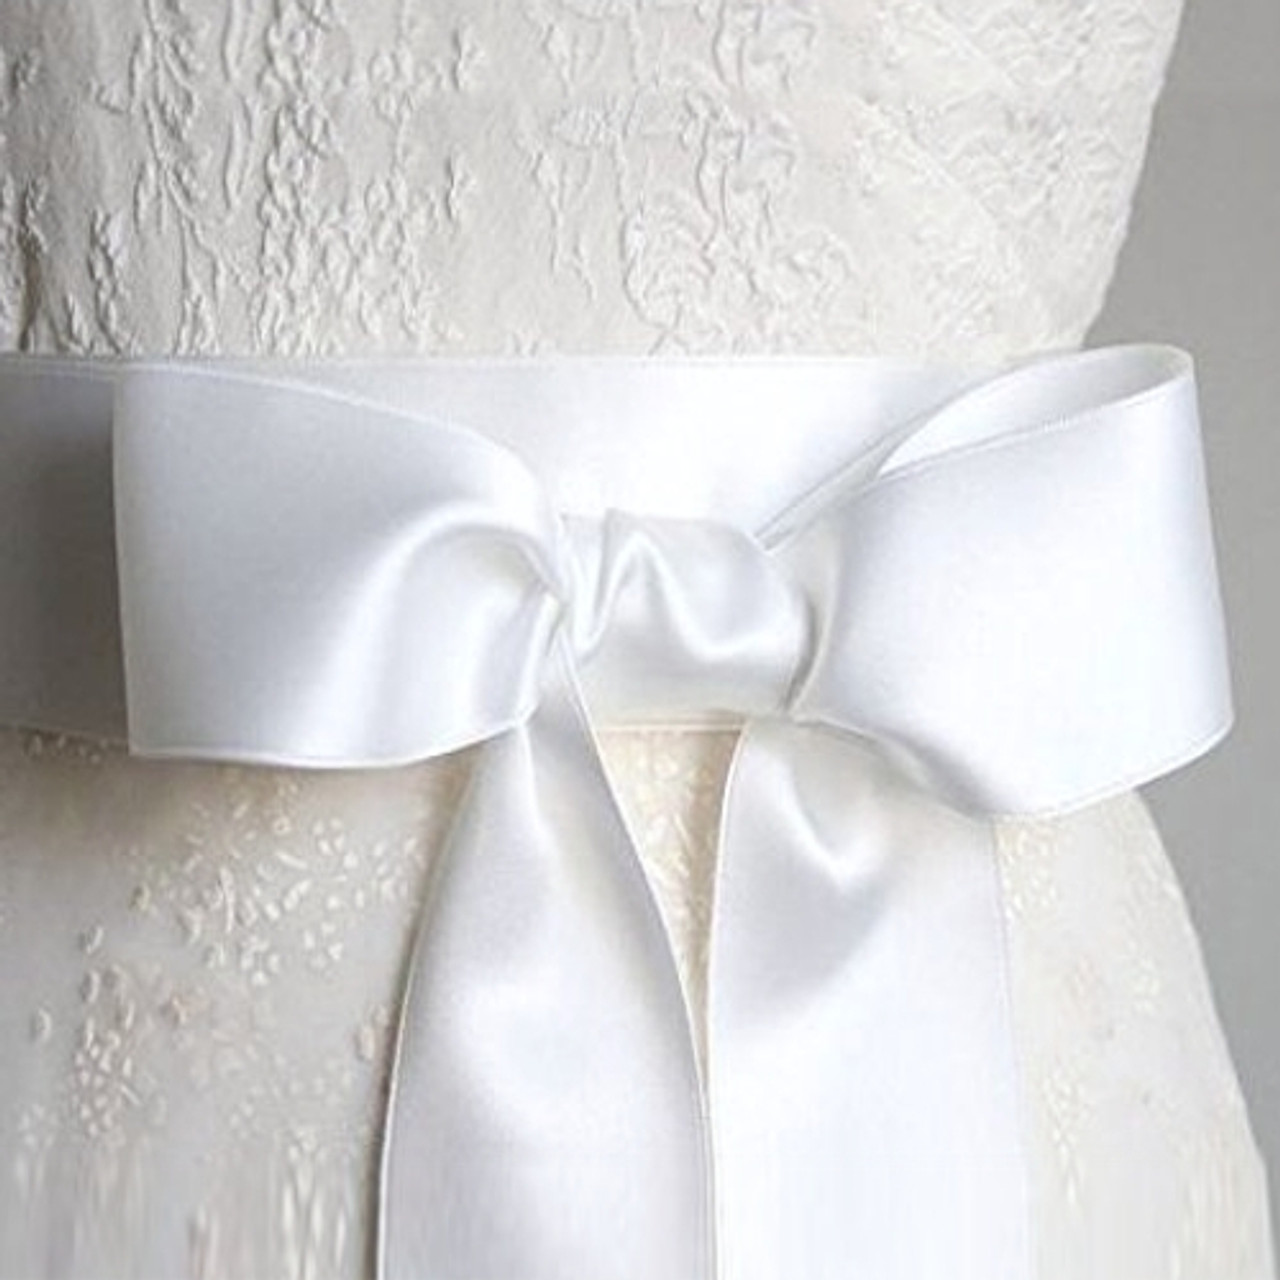 4 inch double faced satin ribbon